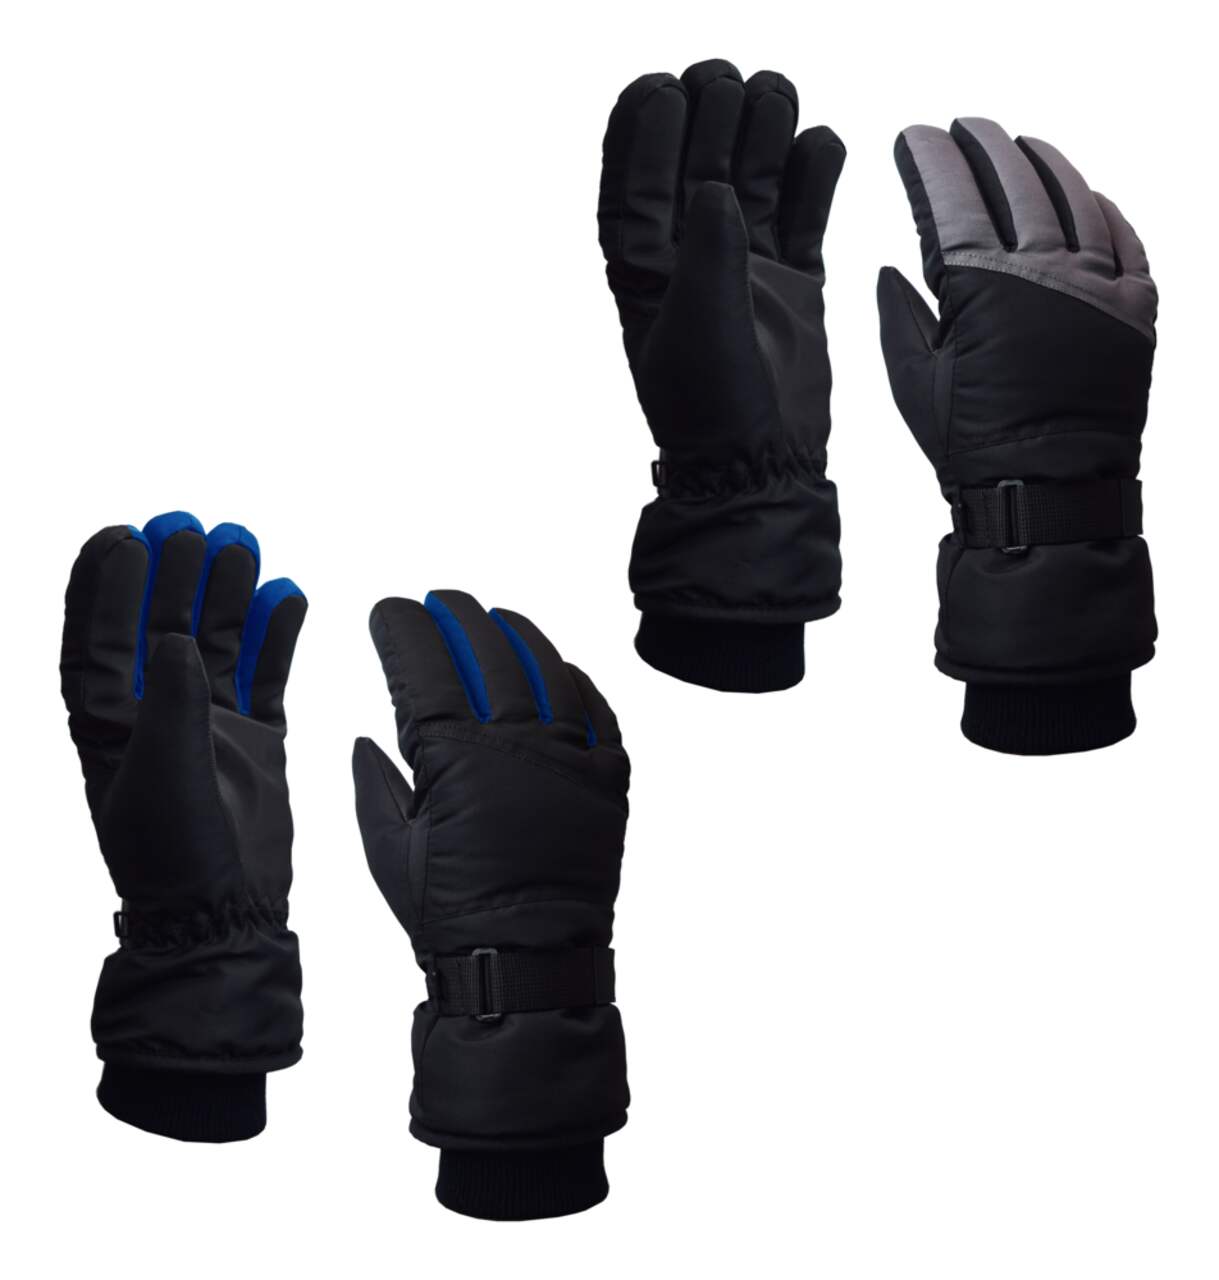 Outbound Boys Thermal Insulated Kids Winter Ski Snowboard Gloves